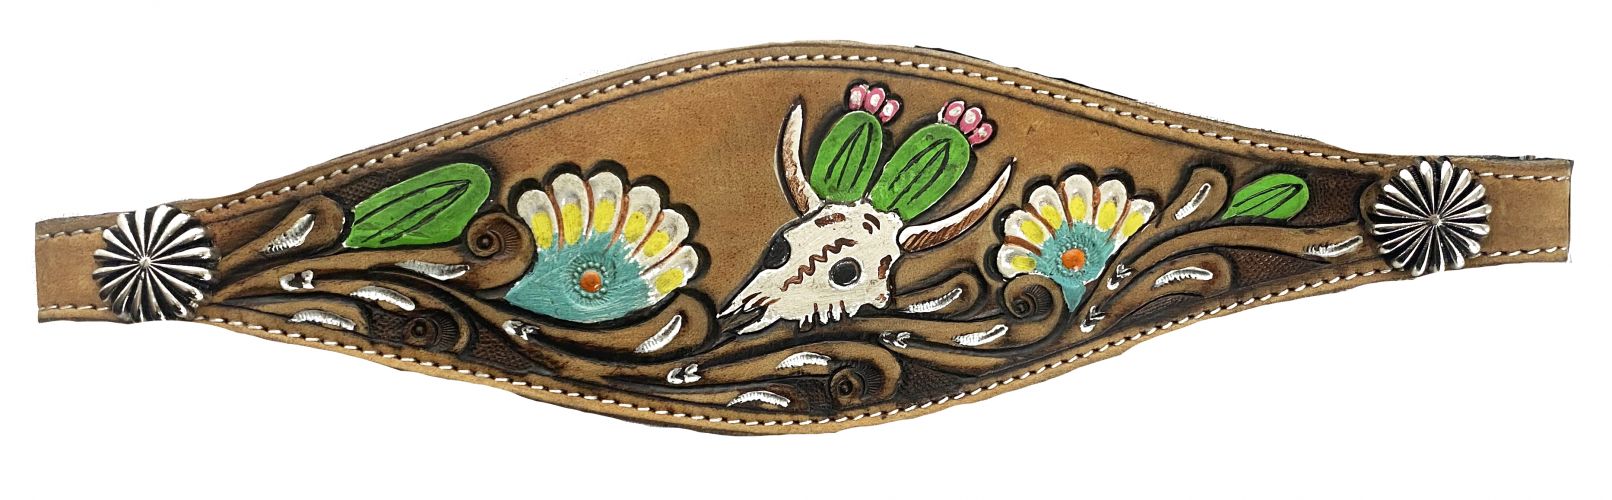 092: Showman® Horse size bronc halter with  hand painted cactus, skull design This halter is const Bronc Halter Showman   